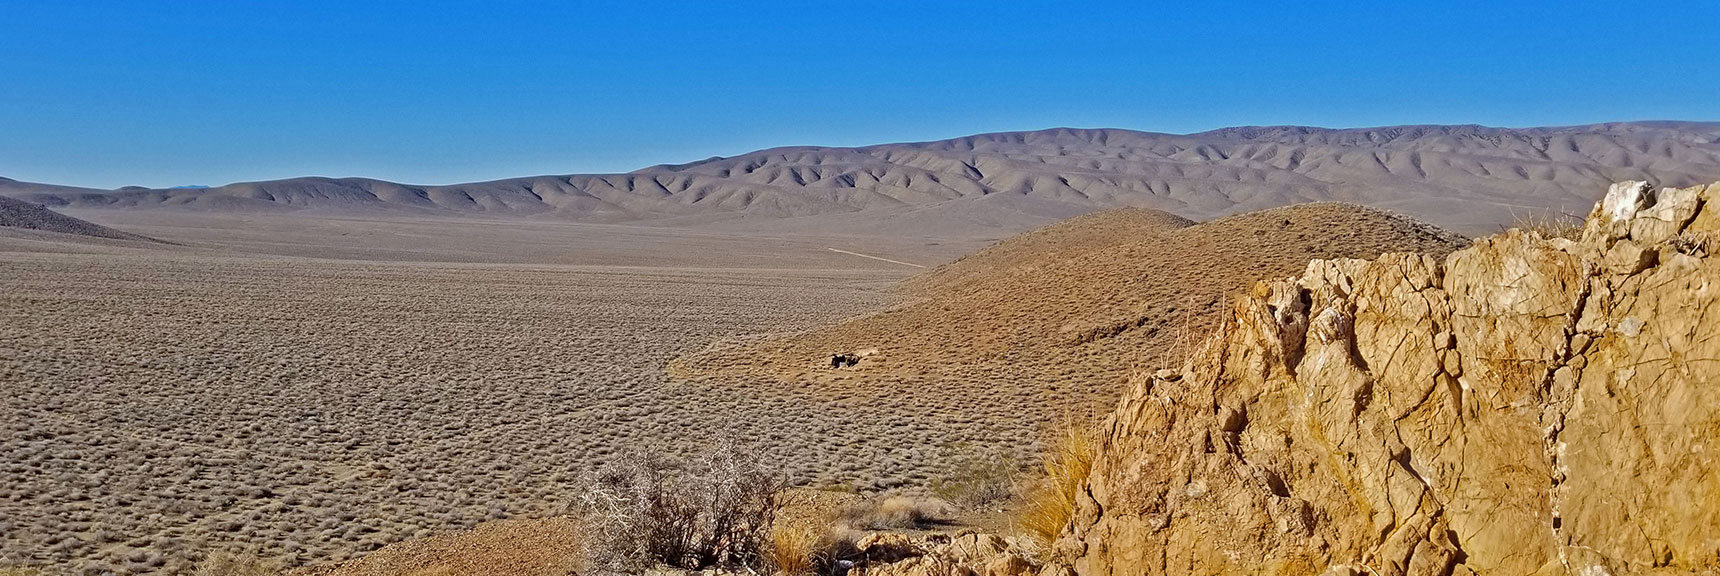 Another Abandoned Mine from Summit of Providence Ridge Looking Toward Emigrant Canyon | Eureka Mine, Harrisburg, Cashier Mill, Death Valley, California